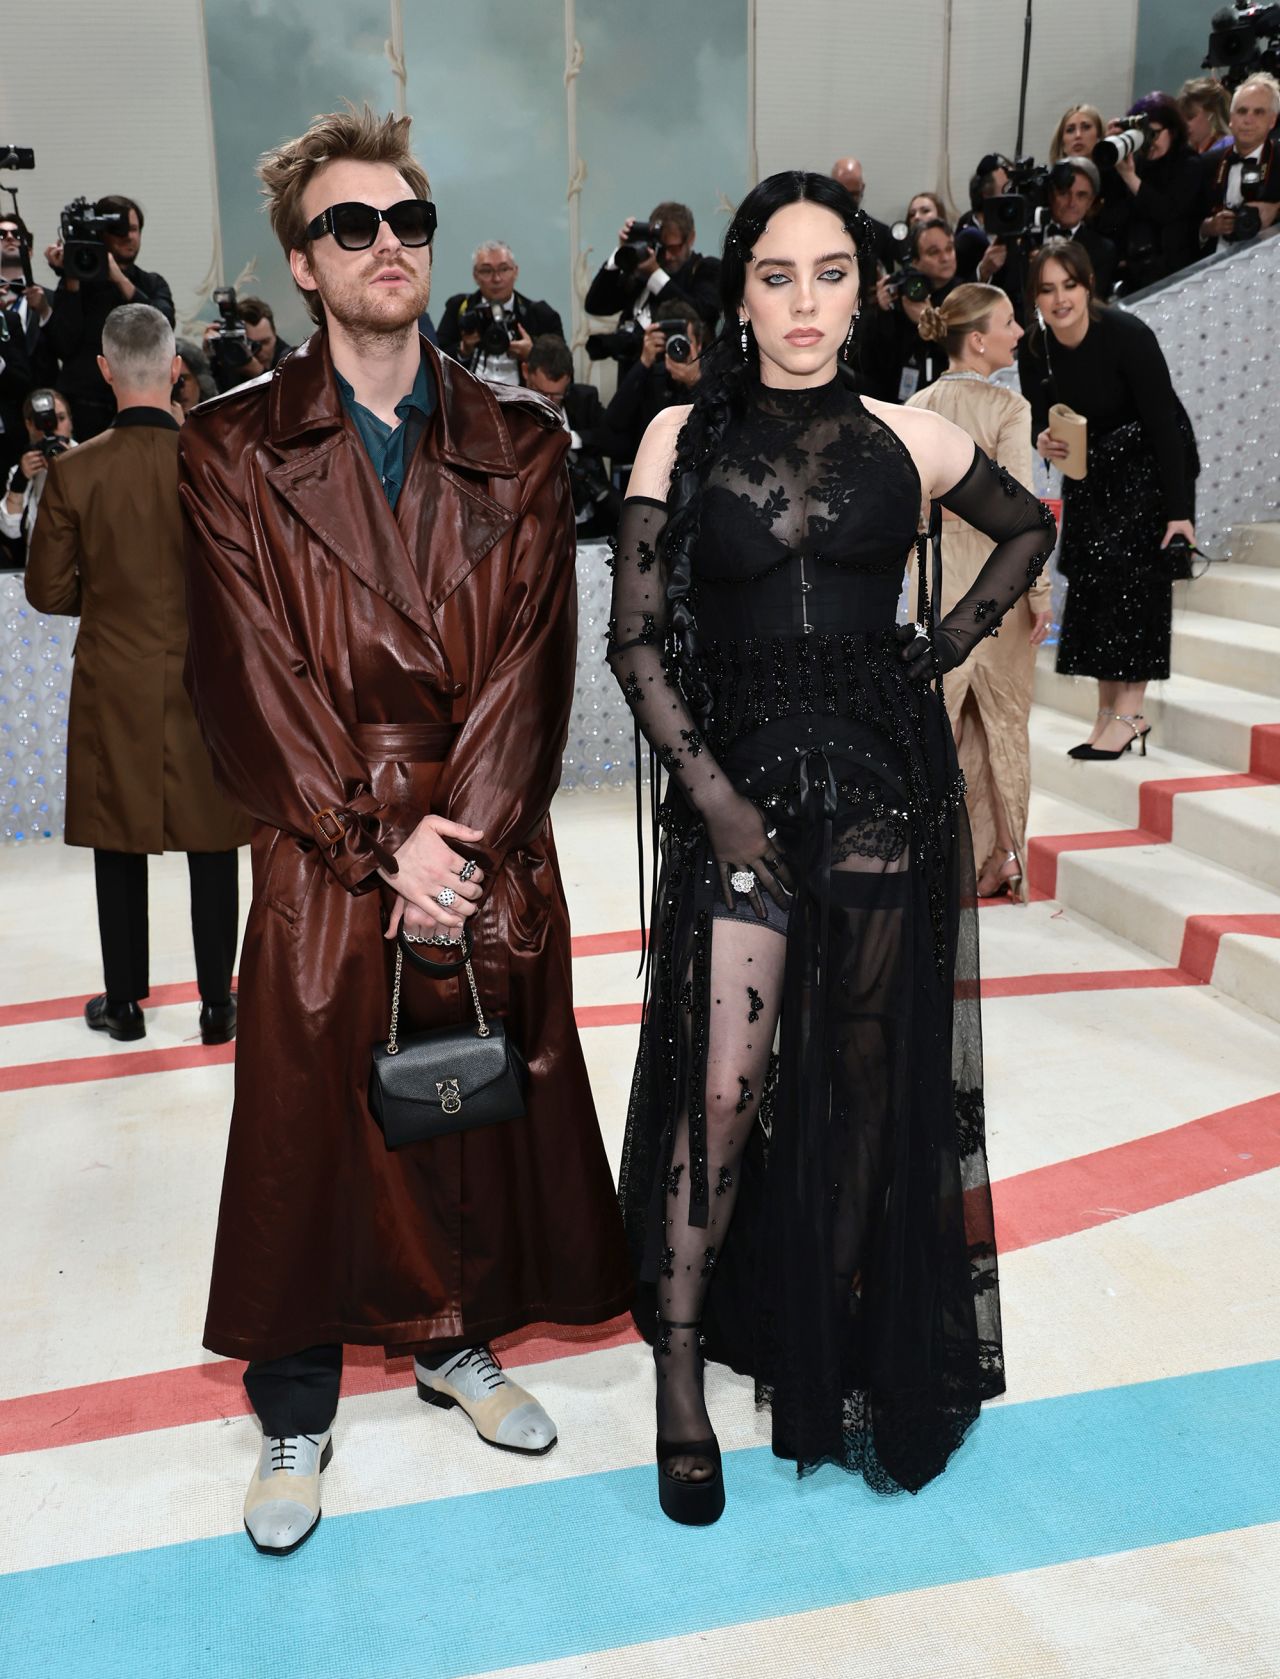 Billie Eilish honored Lagerfeld in a black Simone Rocha ensemble, arriving with brother Finneas dressed in Vivienne Westwood.
